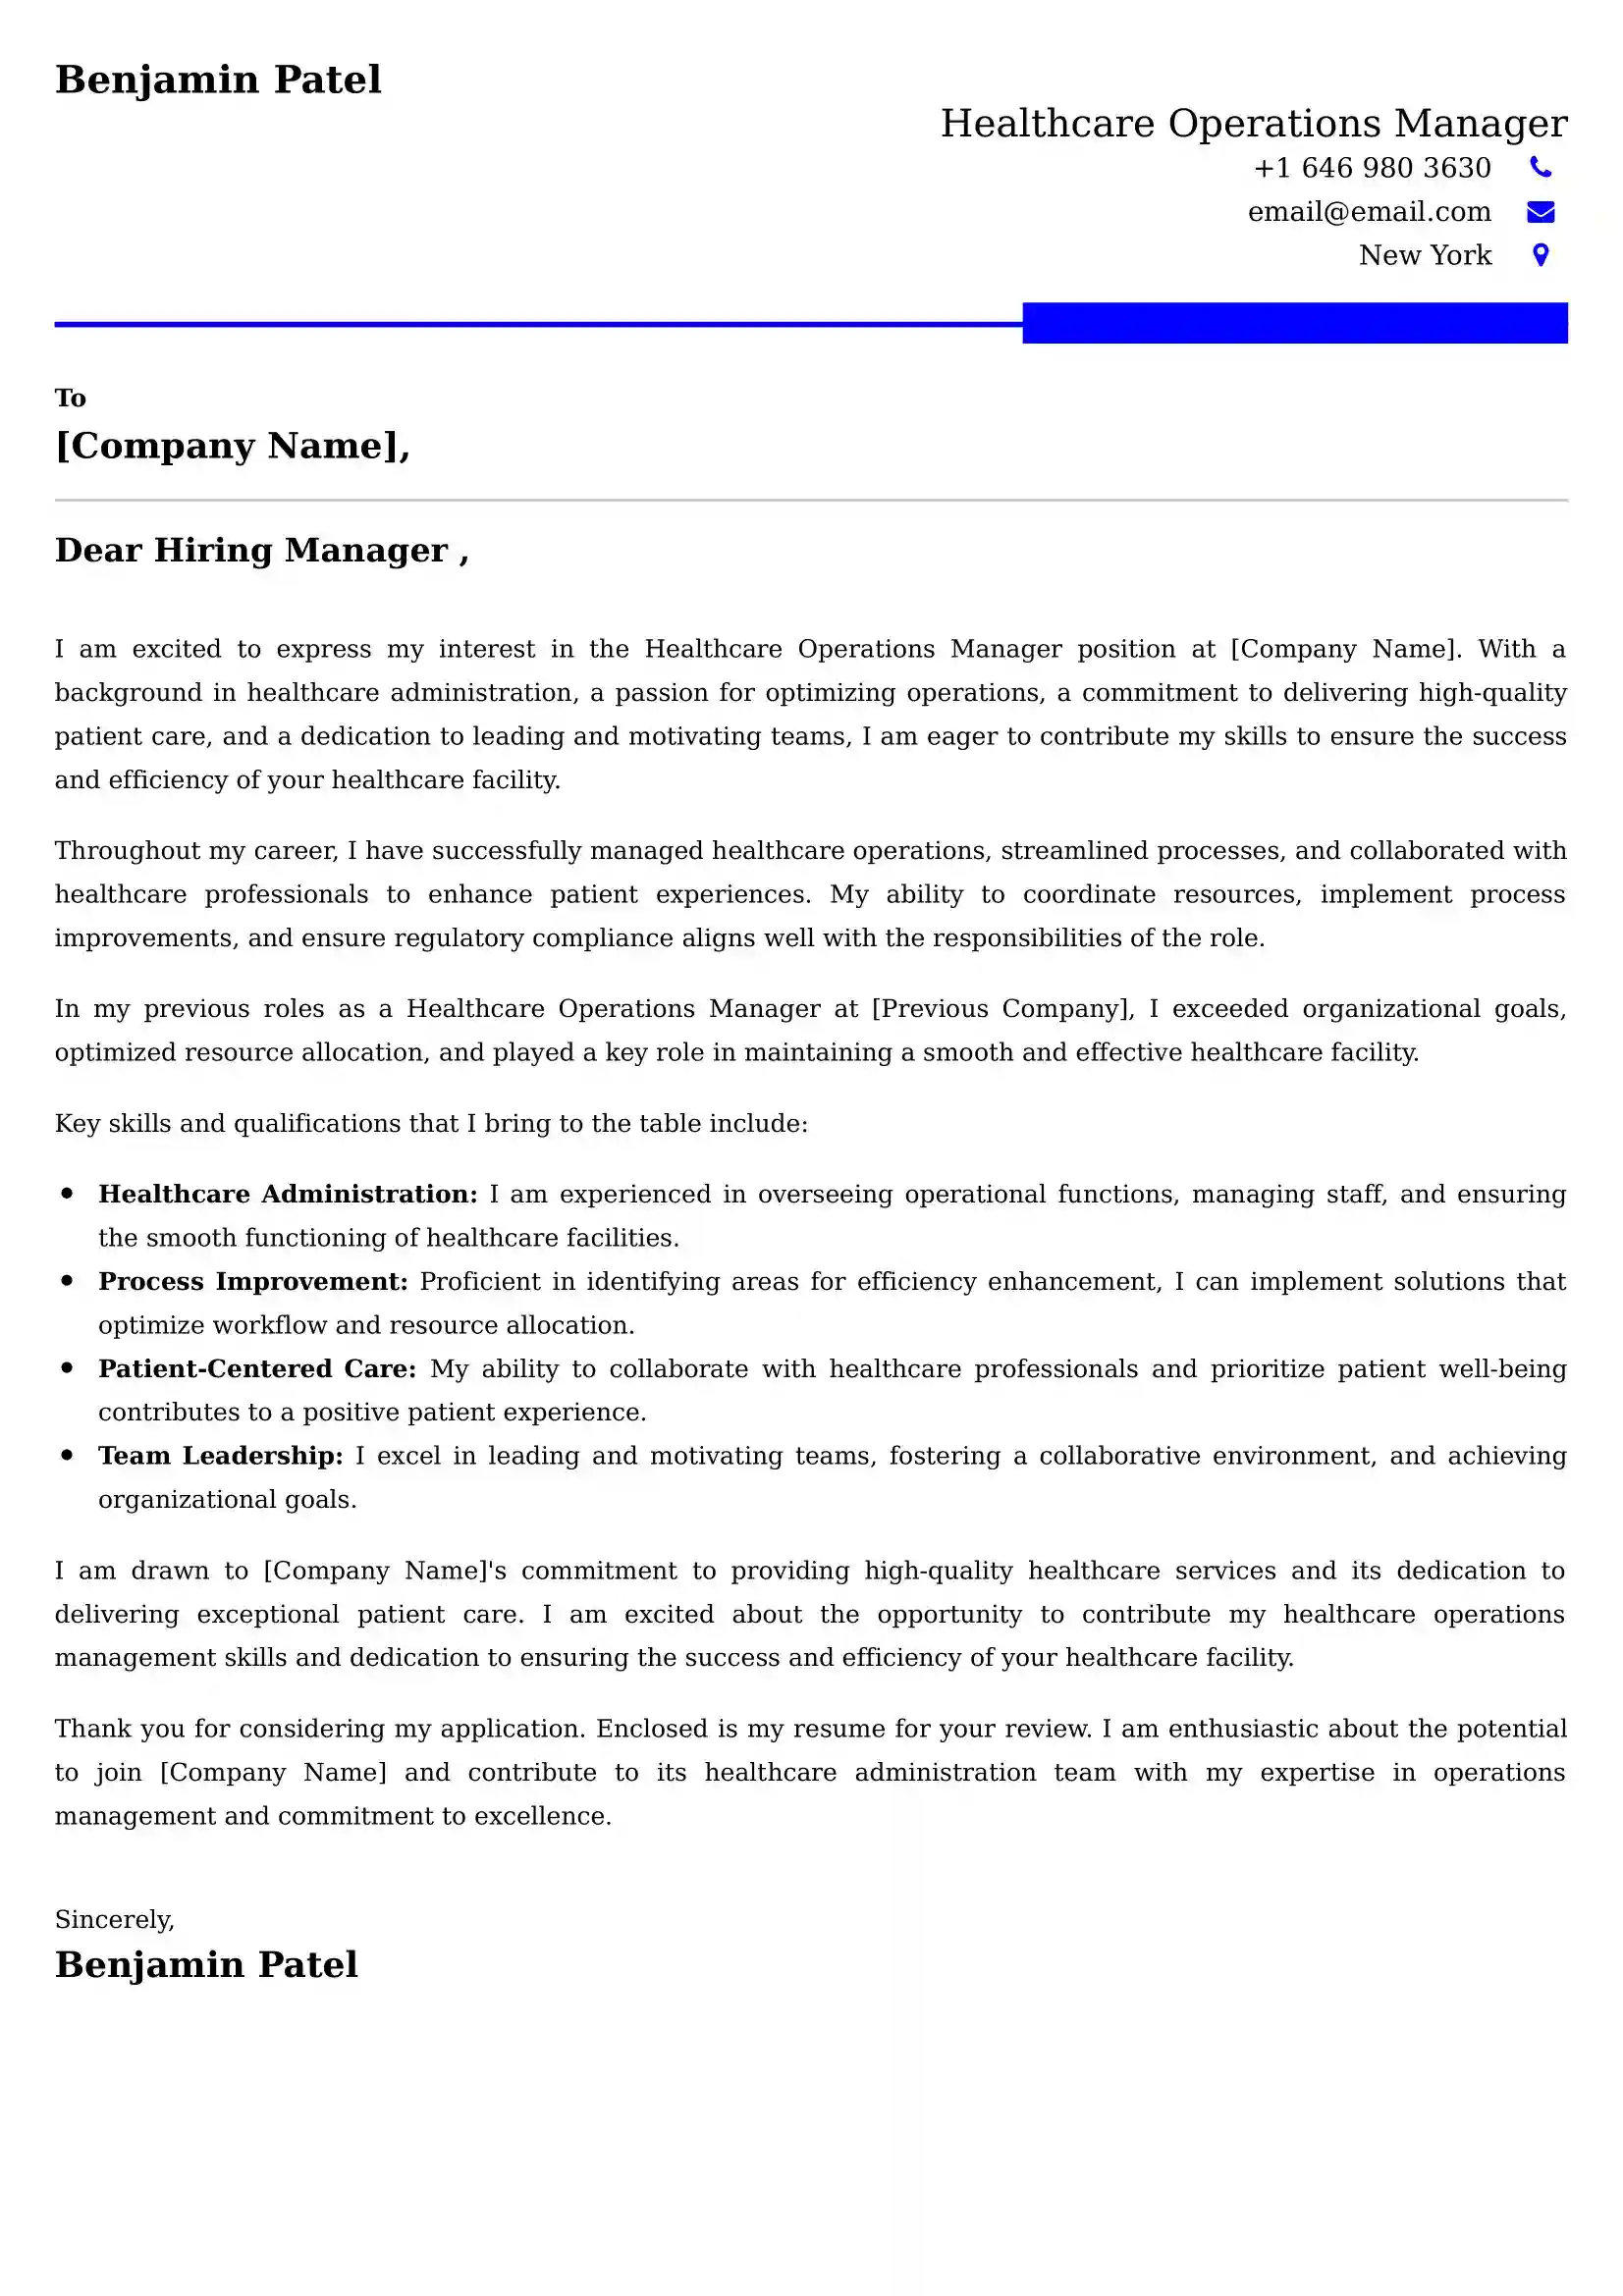 Healthcare Operations Manager Cover Letter Examples -Latest Brazilian Templates